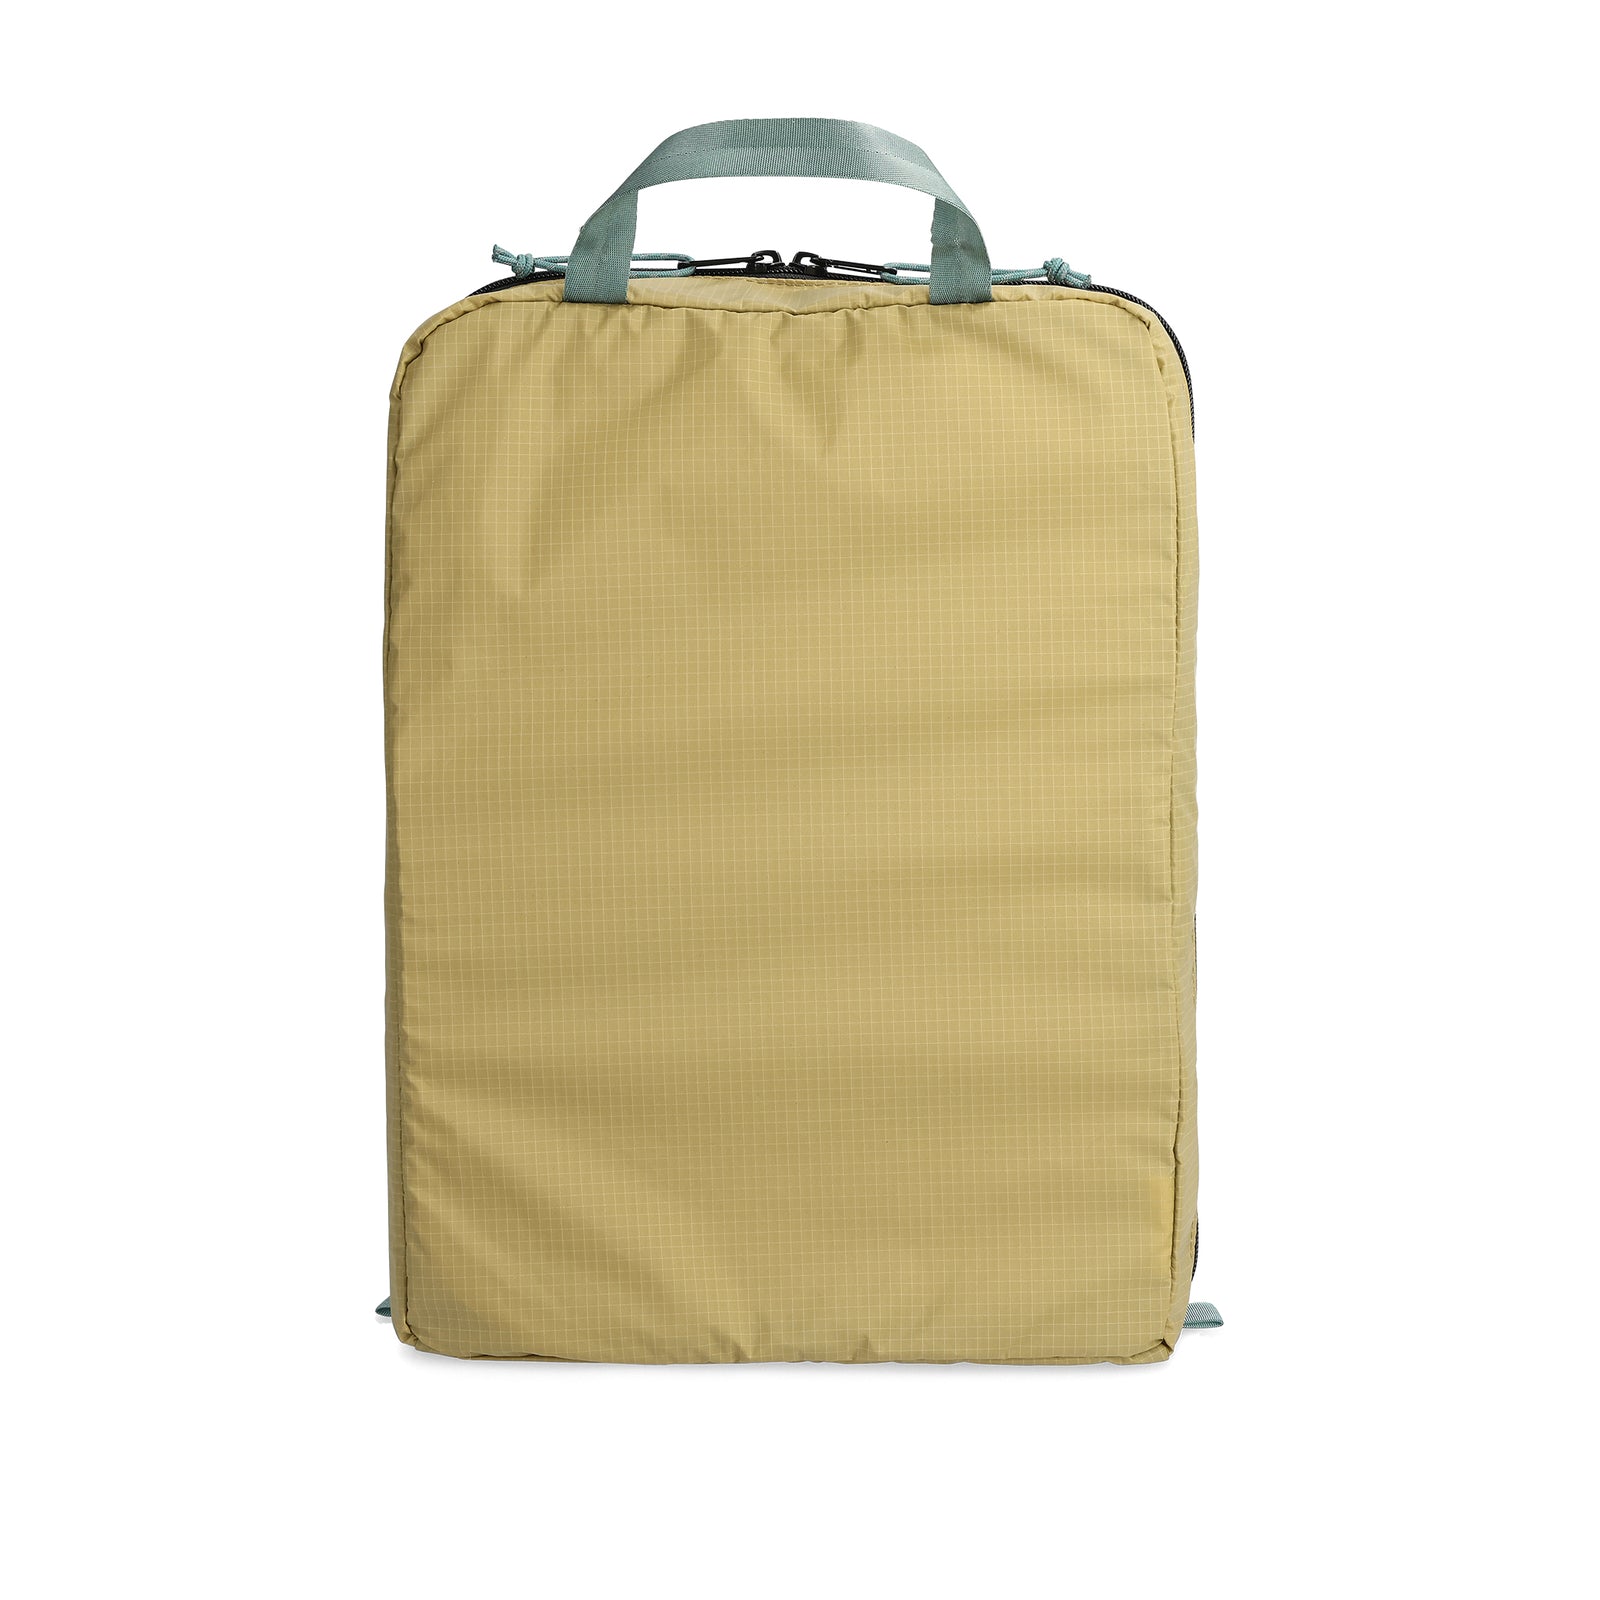 Back View of Topo Designs Topolite™ Pack Bag - 10L in "Moss"